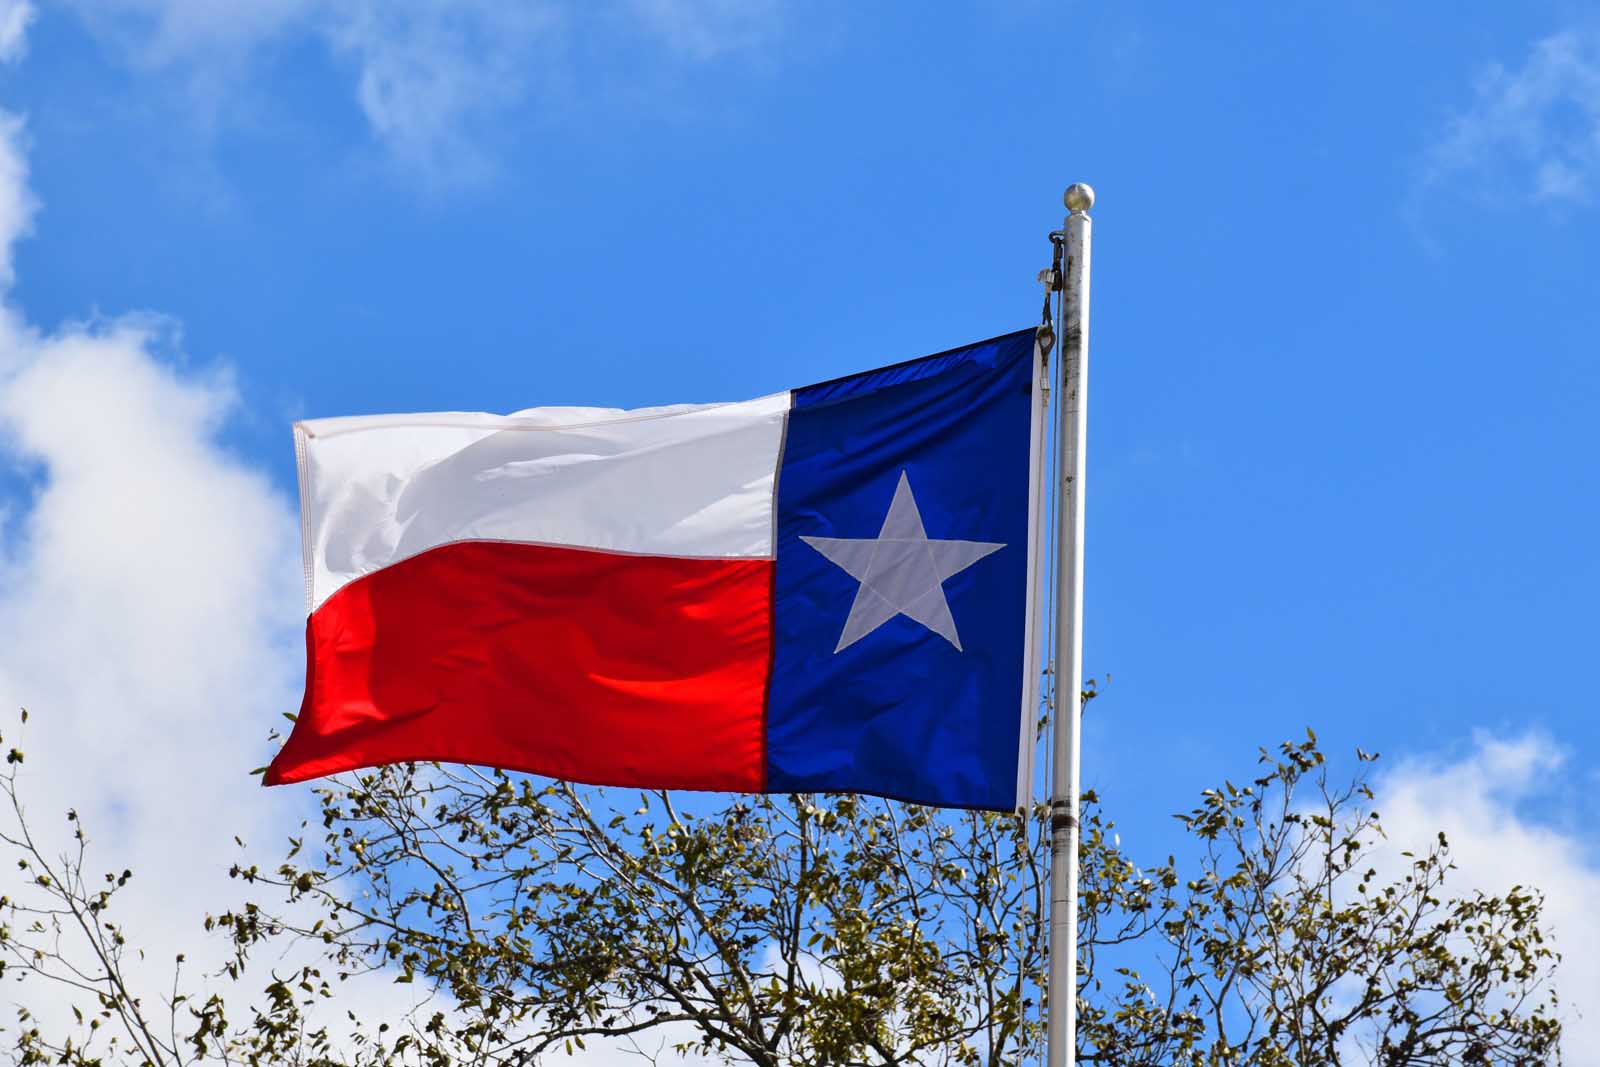 Facts about Texas Lone Star State